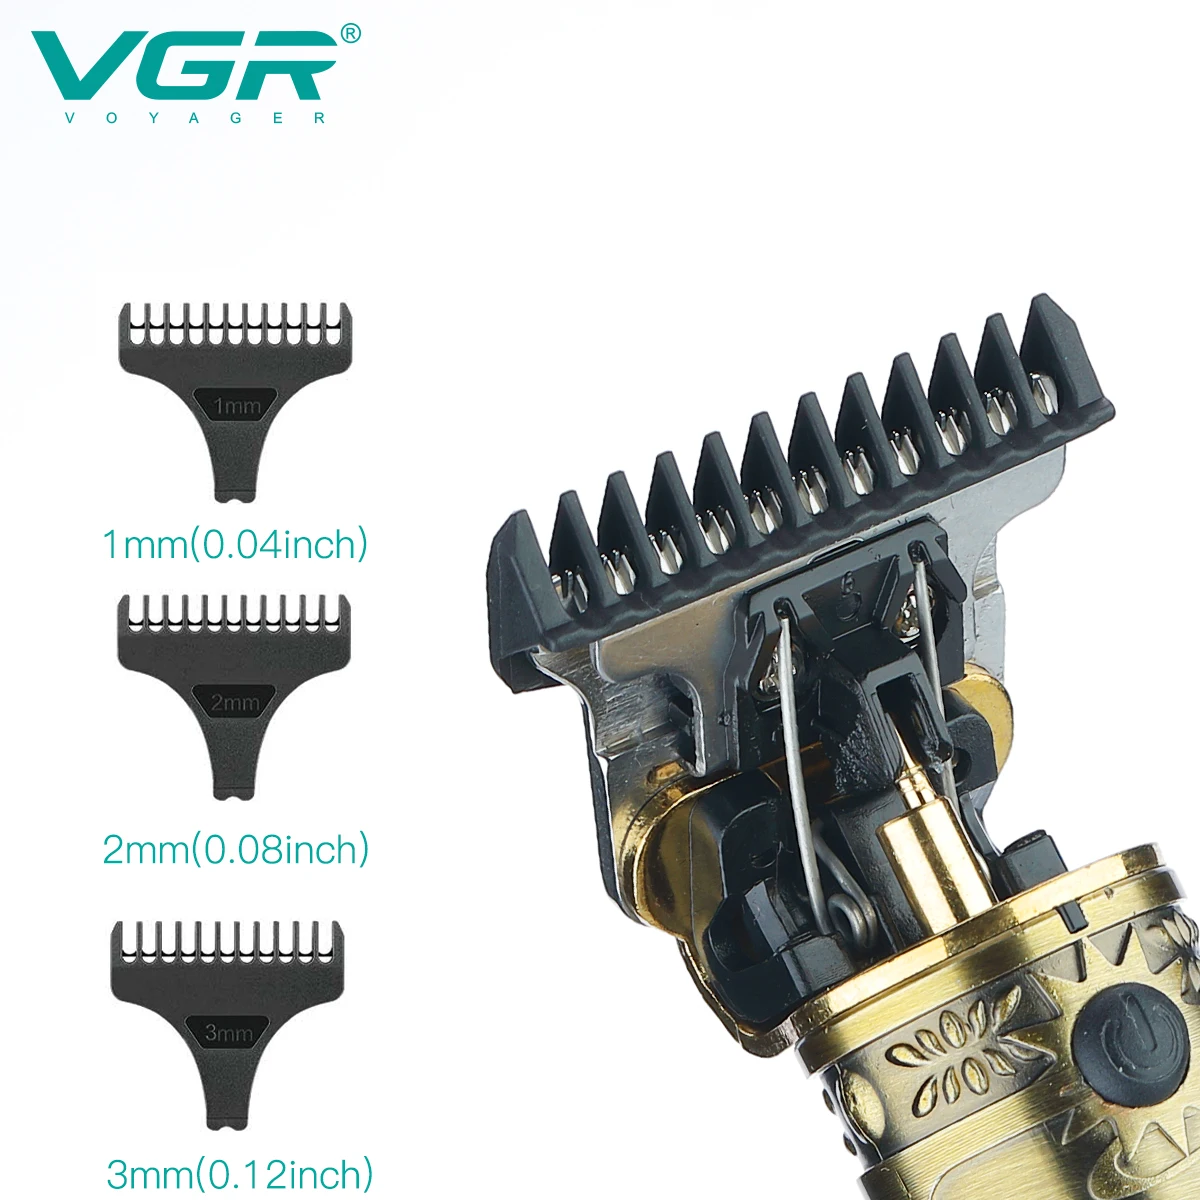 VGR Vintage T9 Trimmer for Men Beard Trimmer Hair Clipper Hair Cutting Machine Professional Barber Cordless Rechargeable V-085